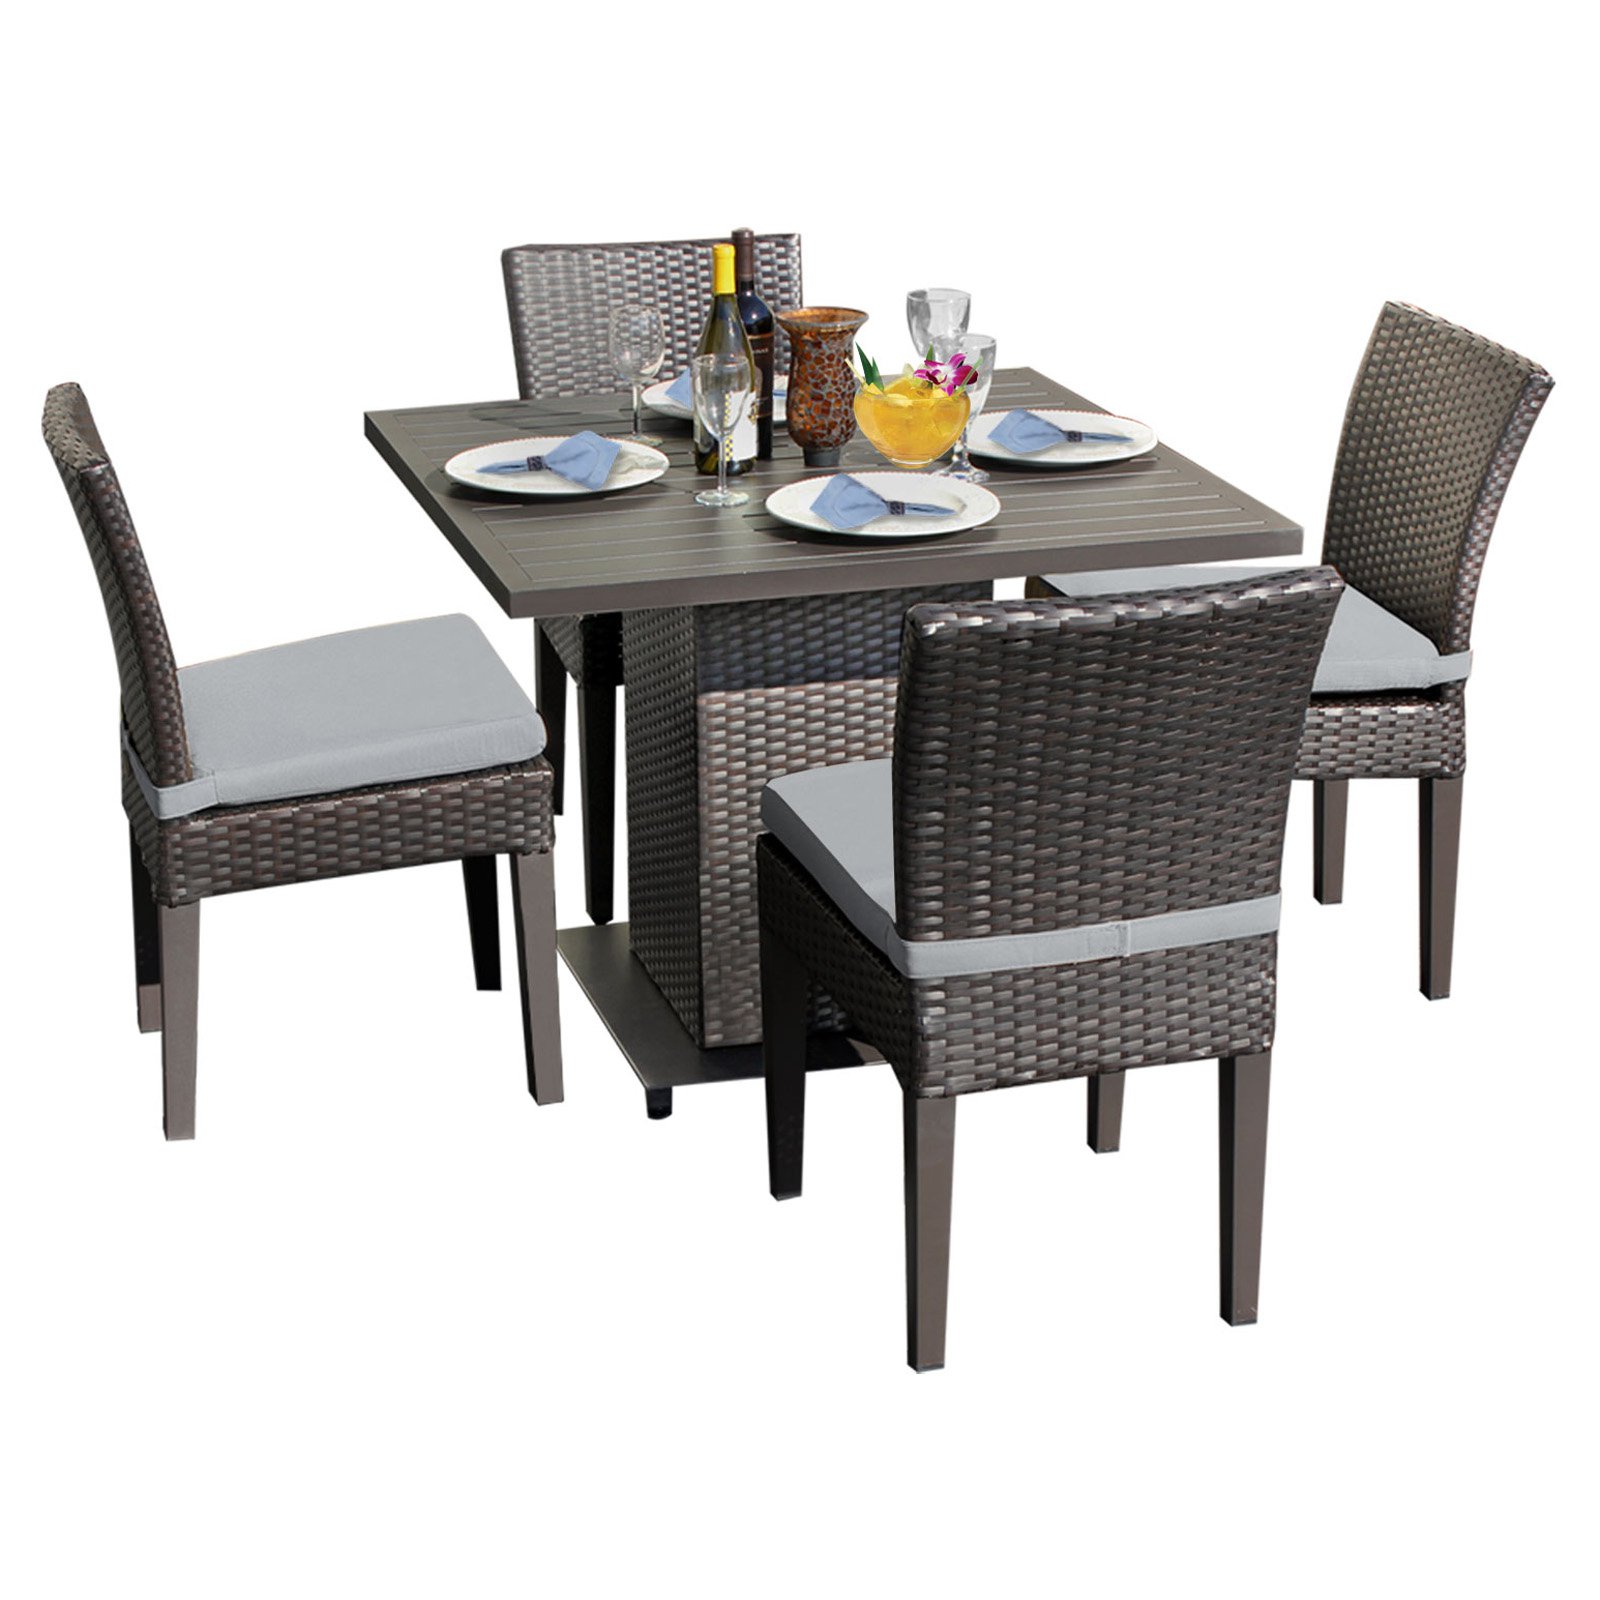 Belle Square Dining Table with 4 Armless Chairs in Grey - image 1 of 2